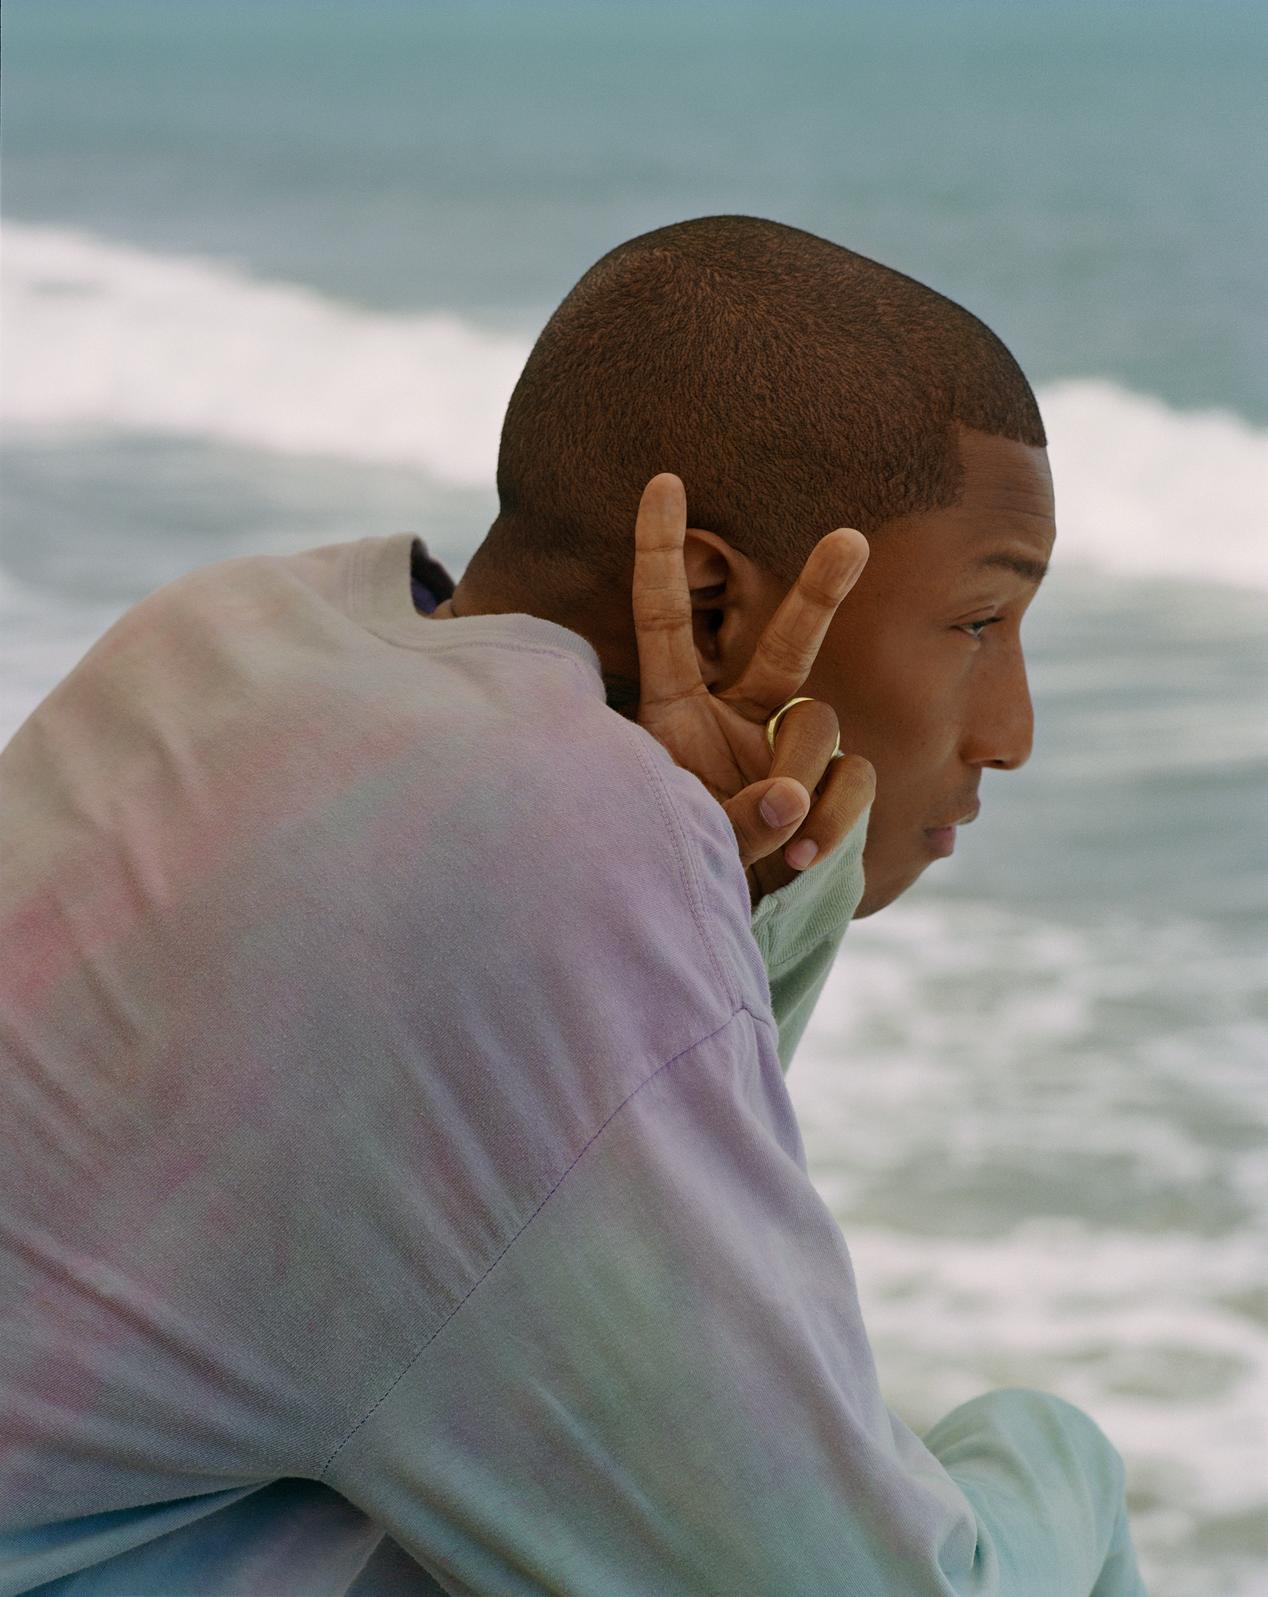 Pharrell Williams photographed by Milan Zrnic